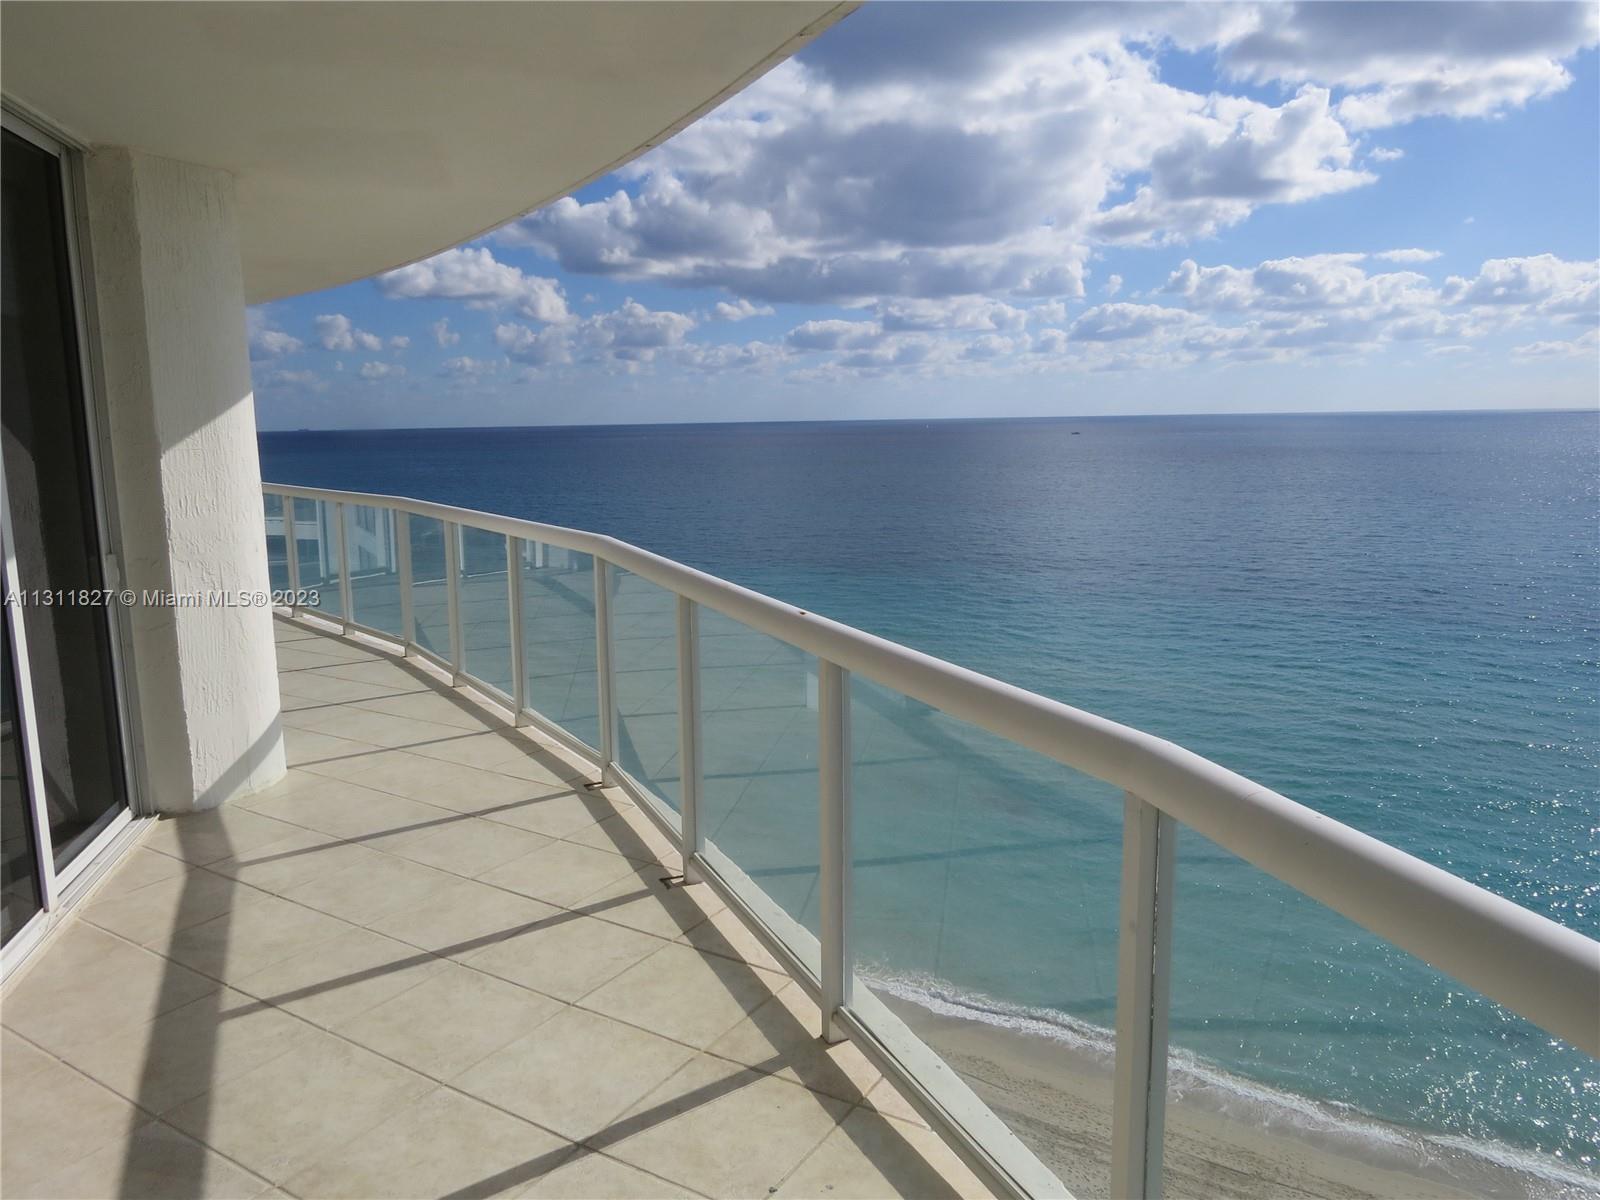 Millennium Condo For Rent / Sunny Isles Beach / 3 Beds + Den / 3.5 Baths / 2,210 sq. ft. of Living Area / Large Open Balcony / Direct Ocean Views / 2 Assigned Parking / Laundry Room / Private Elevator Access / Building Features: Heated Pool with a Jacuzzi, Two-Story Gym, Steam Sauna, Tennis Court, Towel & Chairs Services on the Beach and Much More!